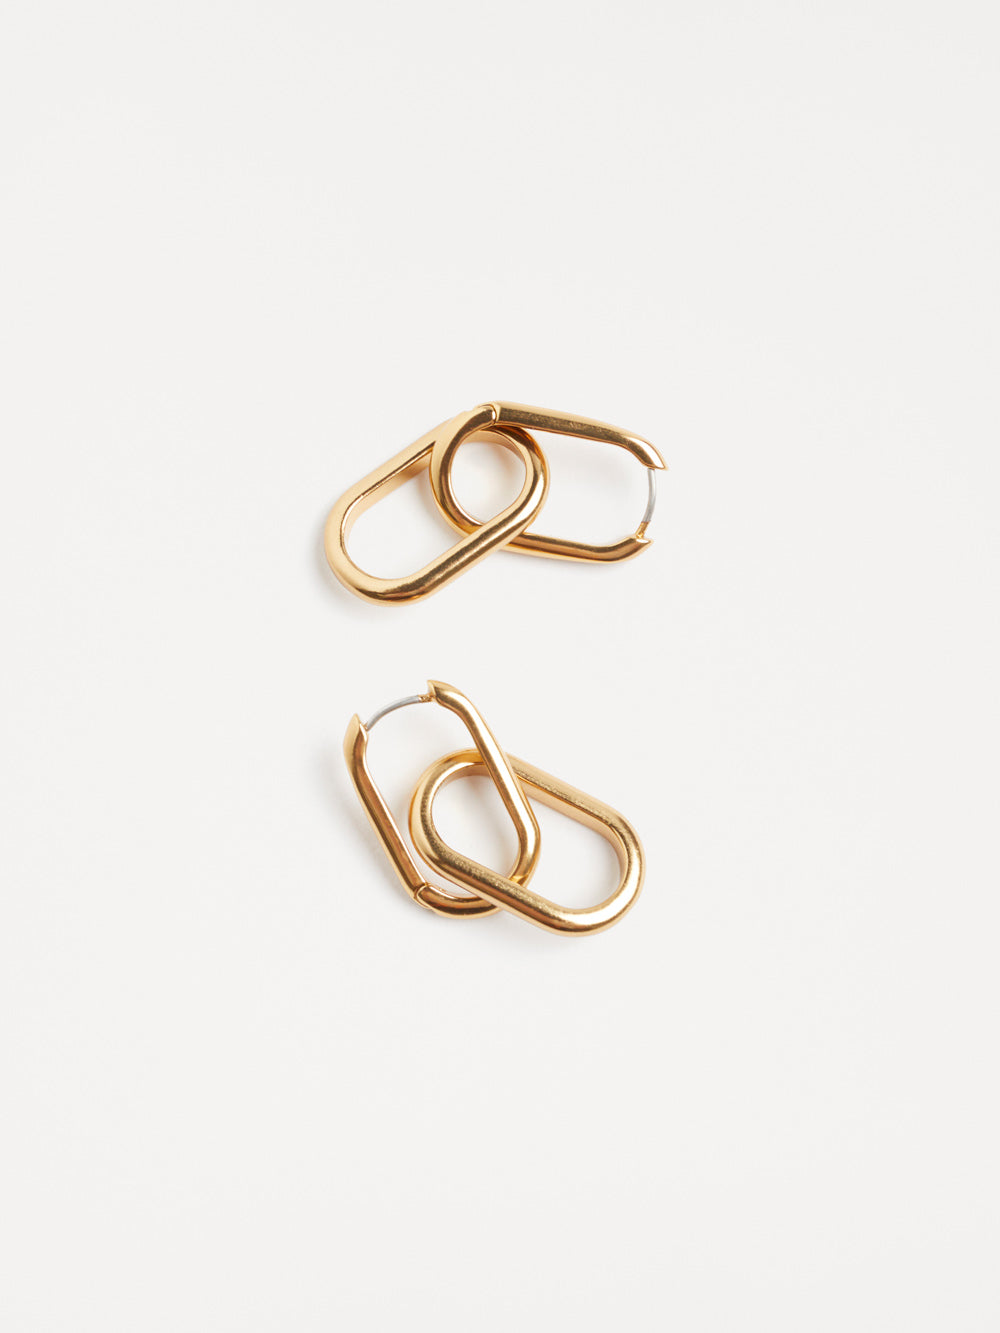 The Twin Link Hoops